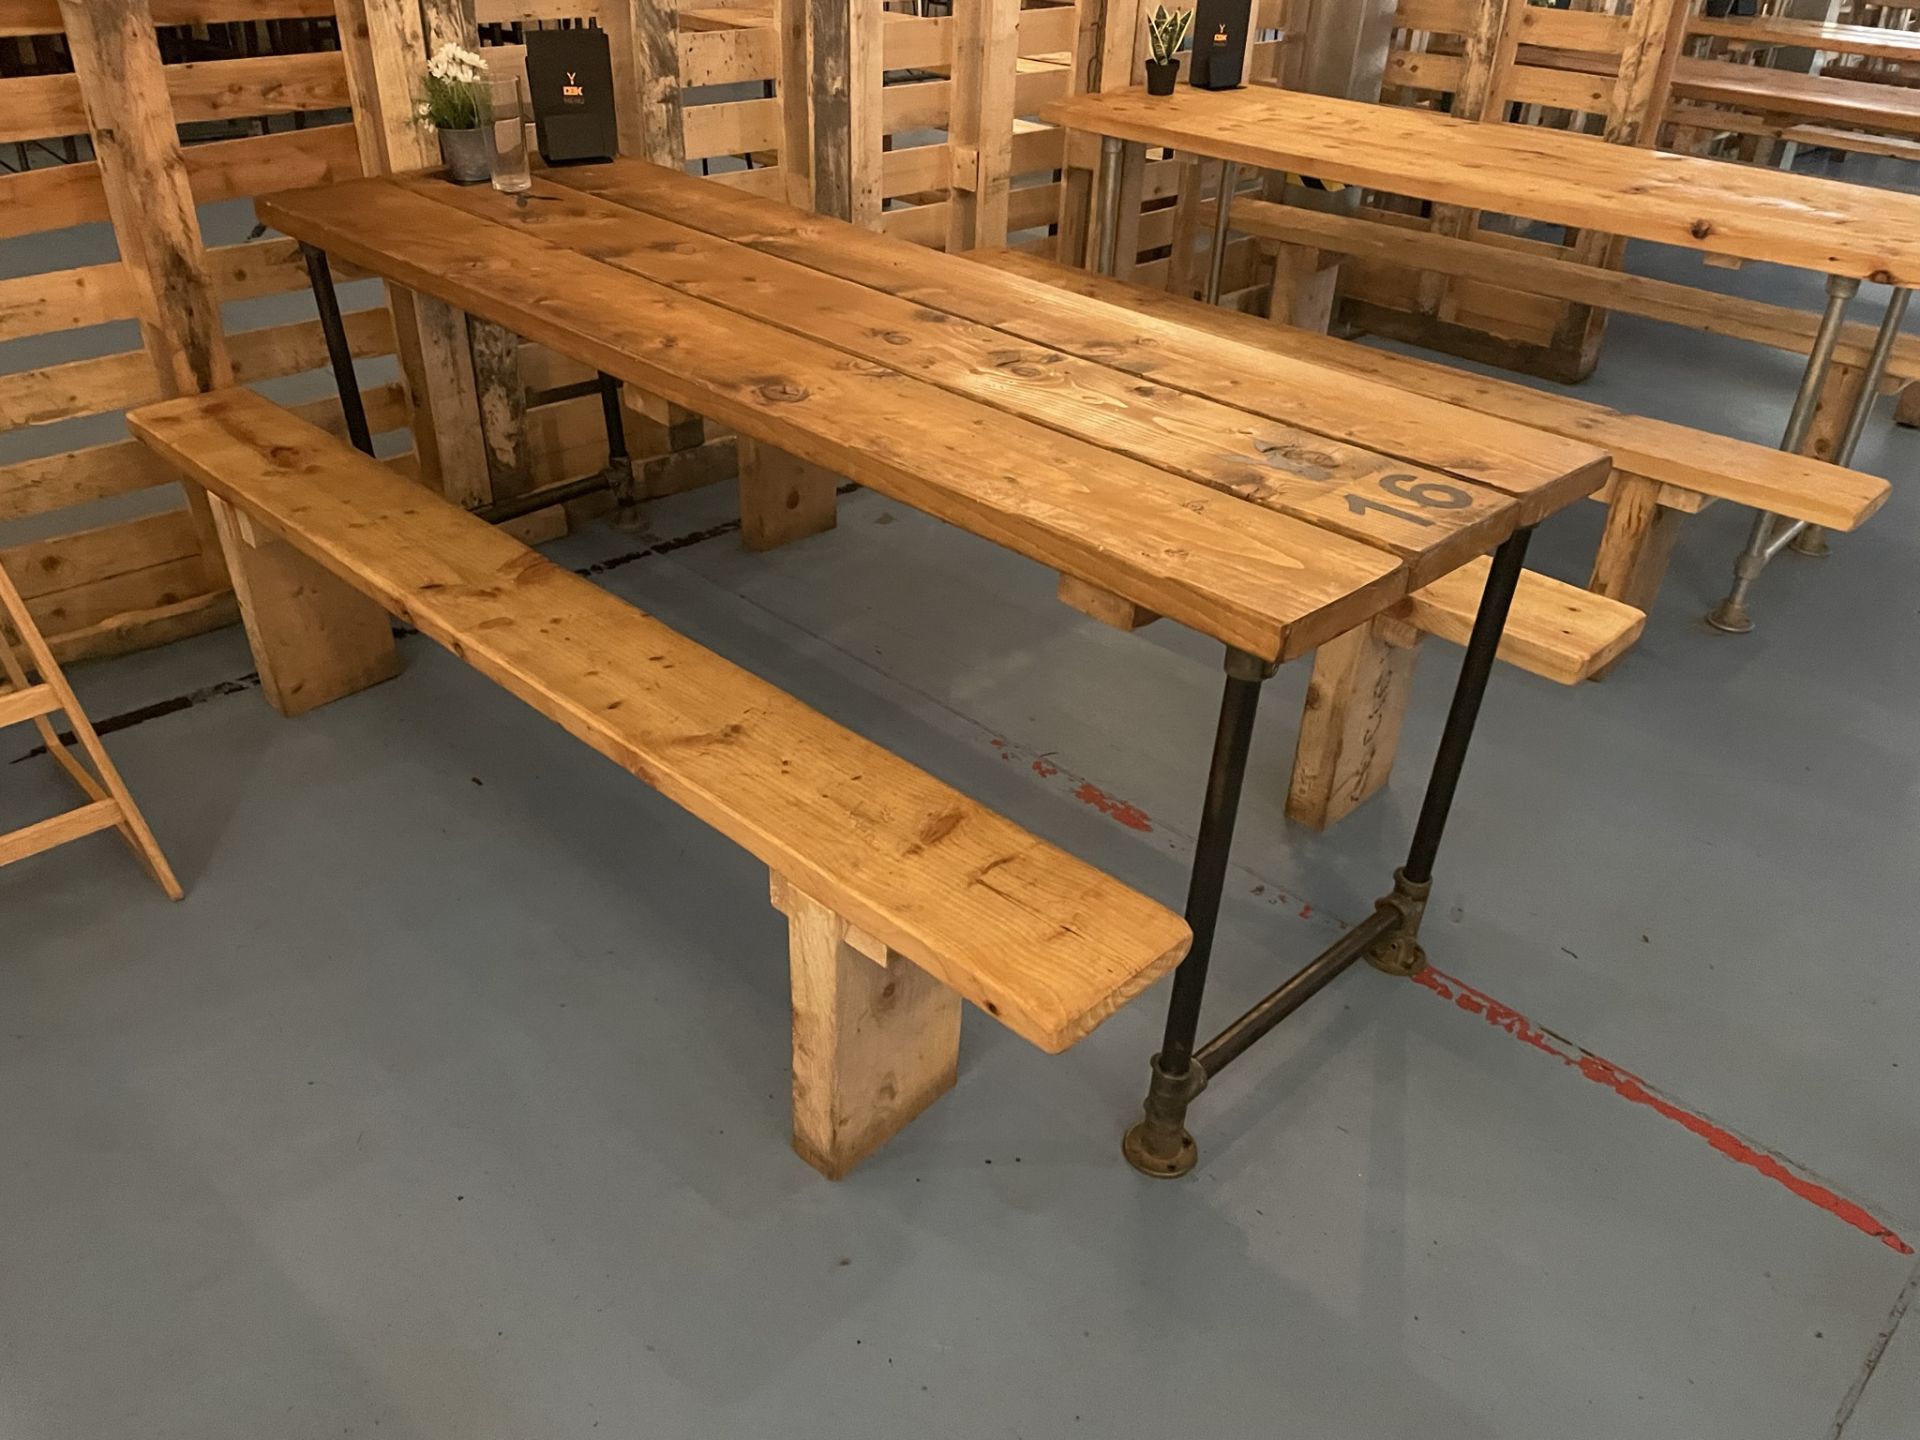 8 x Wooden Dining Tables w/ Metal Frames & 16 x Wooden Seating Benches - Image 3 of 8